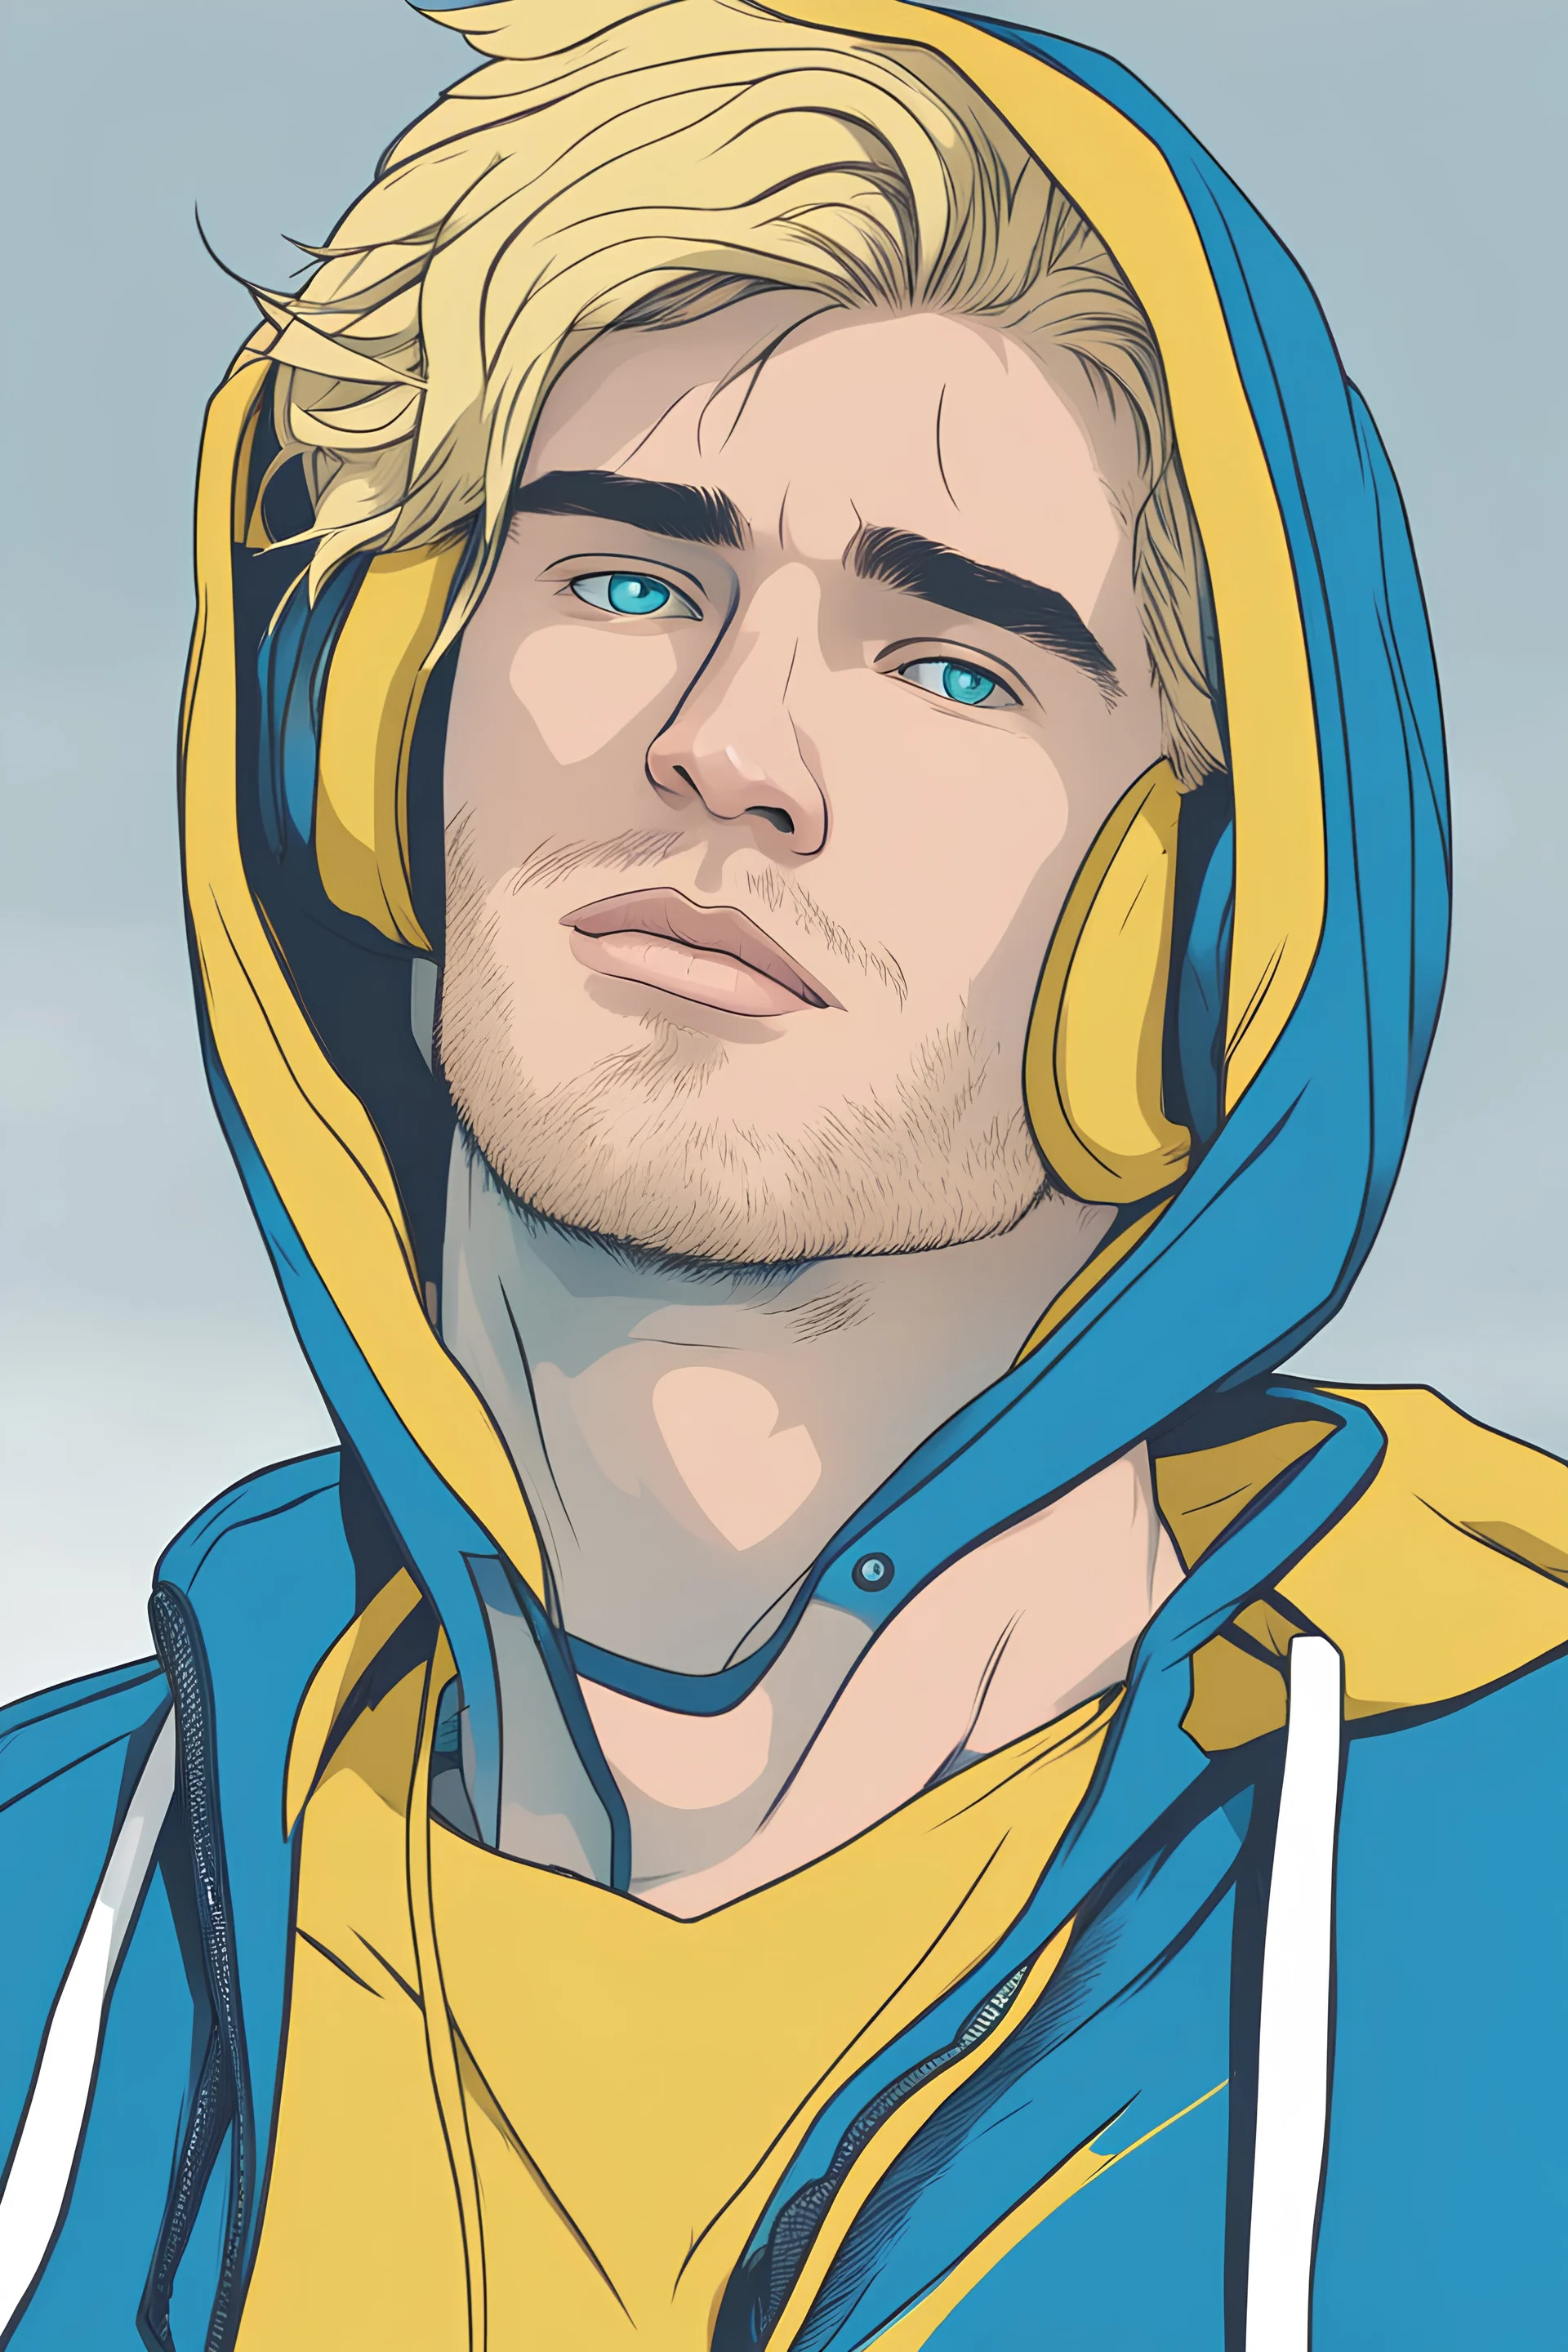 Blonde haired man, yellow hoodie, vibrant blue eyes, animated style